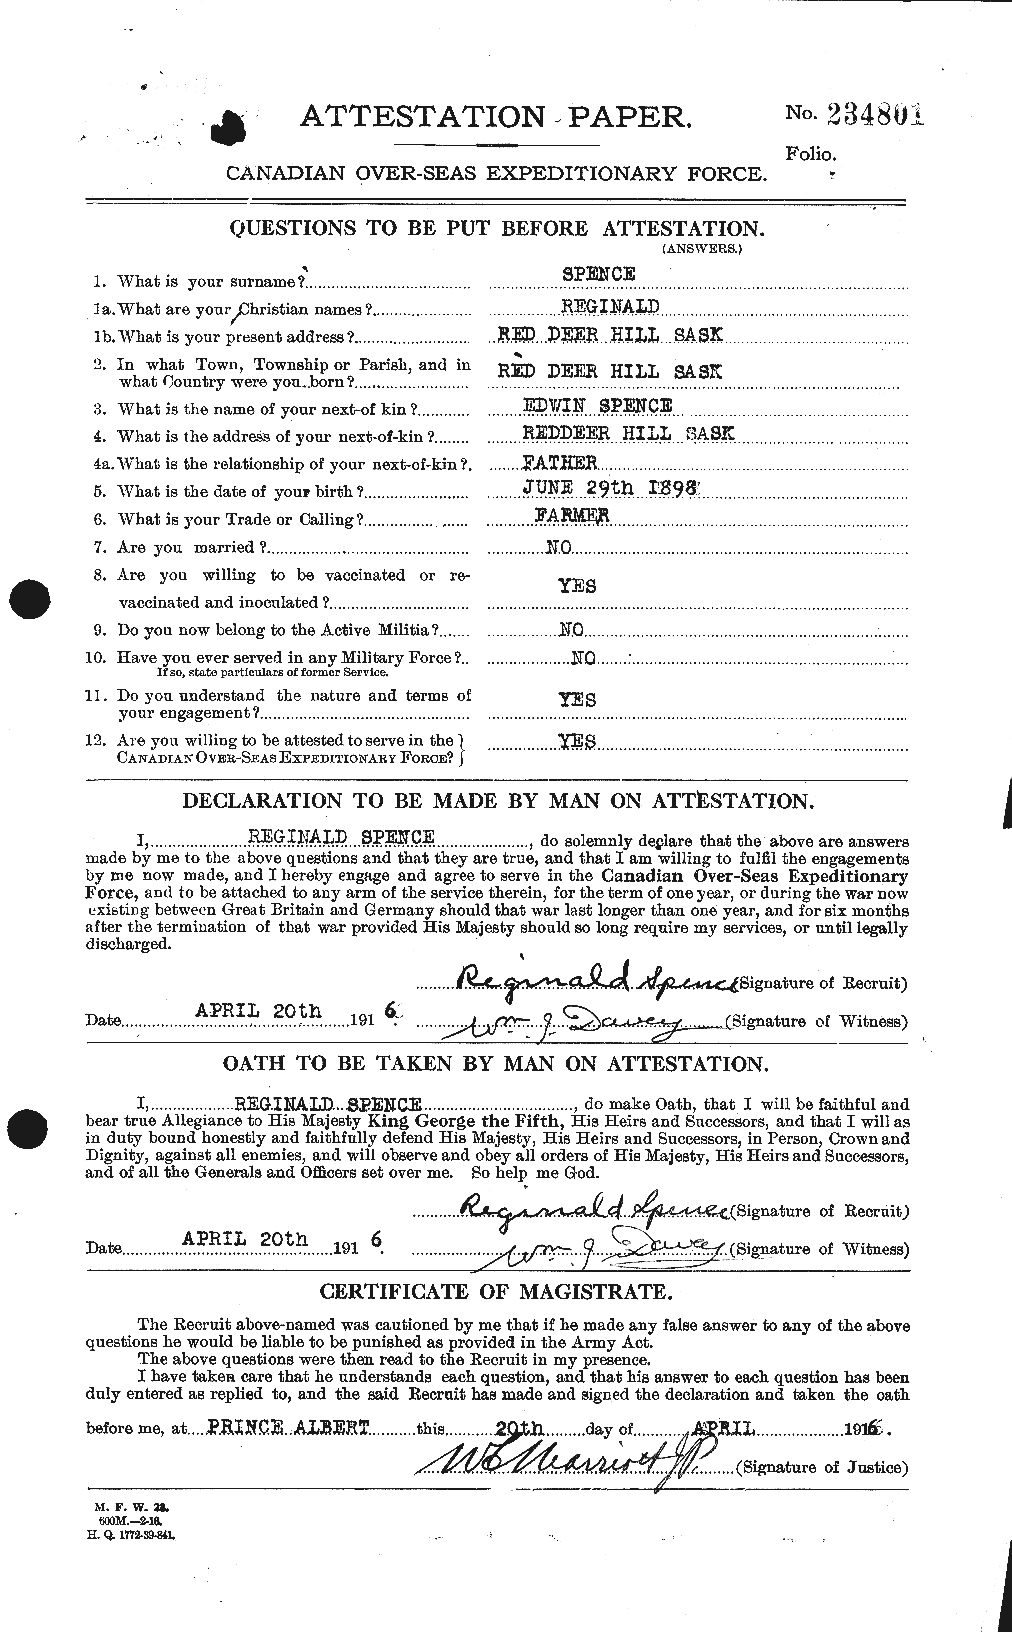 Personnel Records of the First World War - CEF 621409a